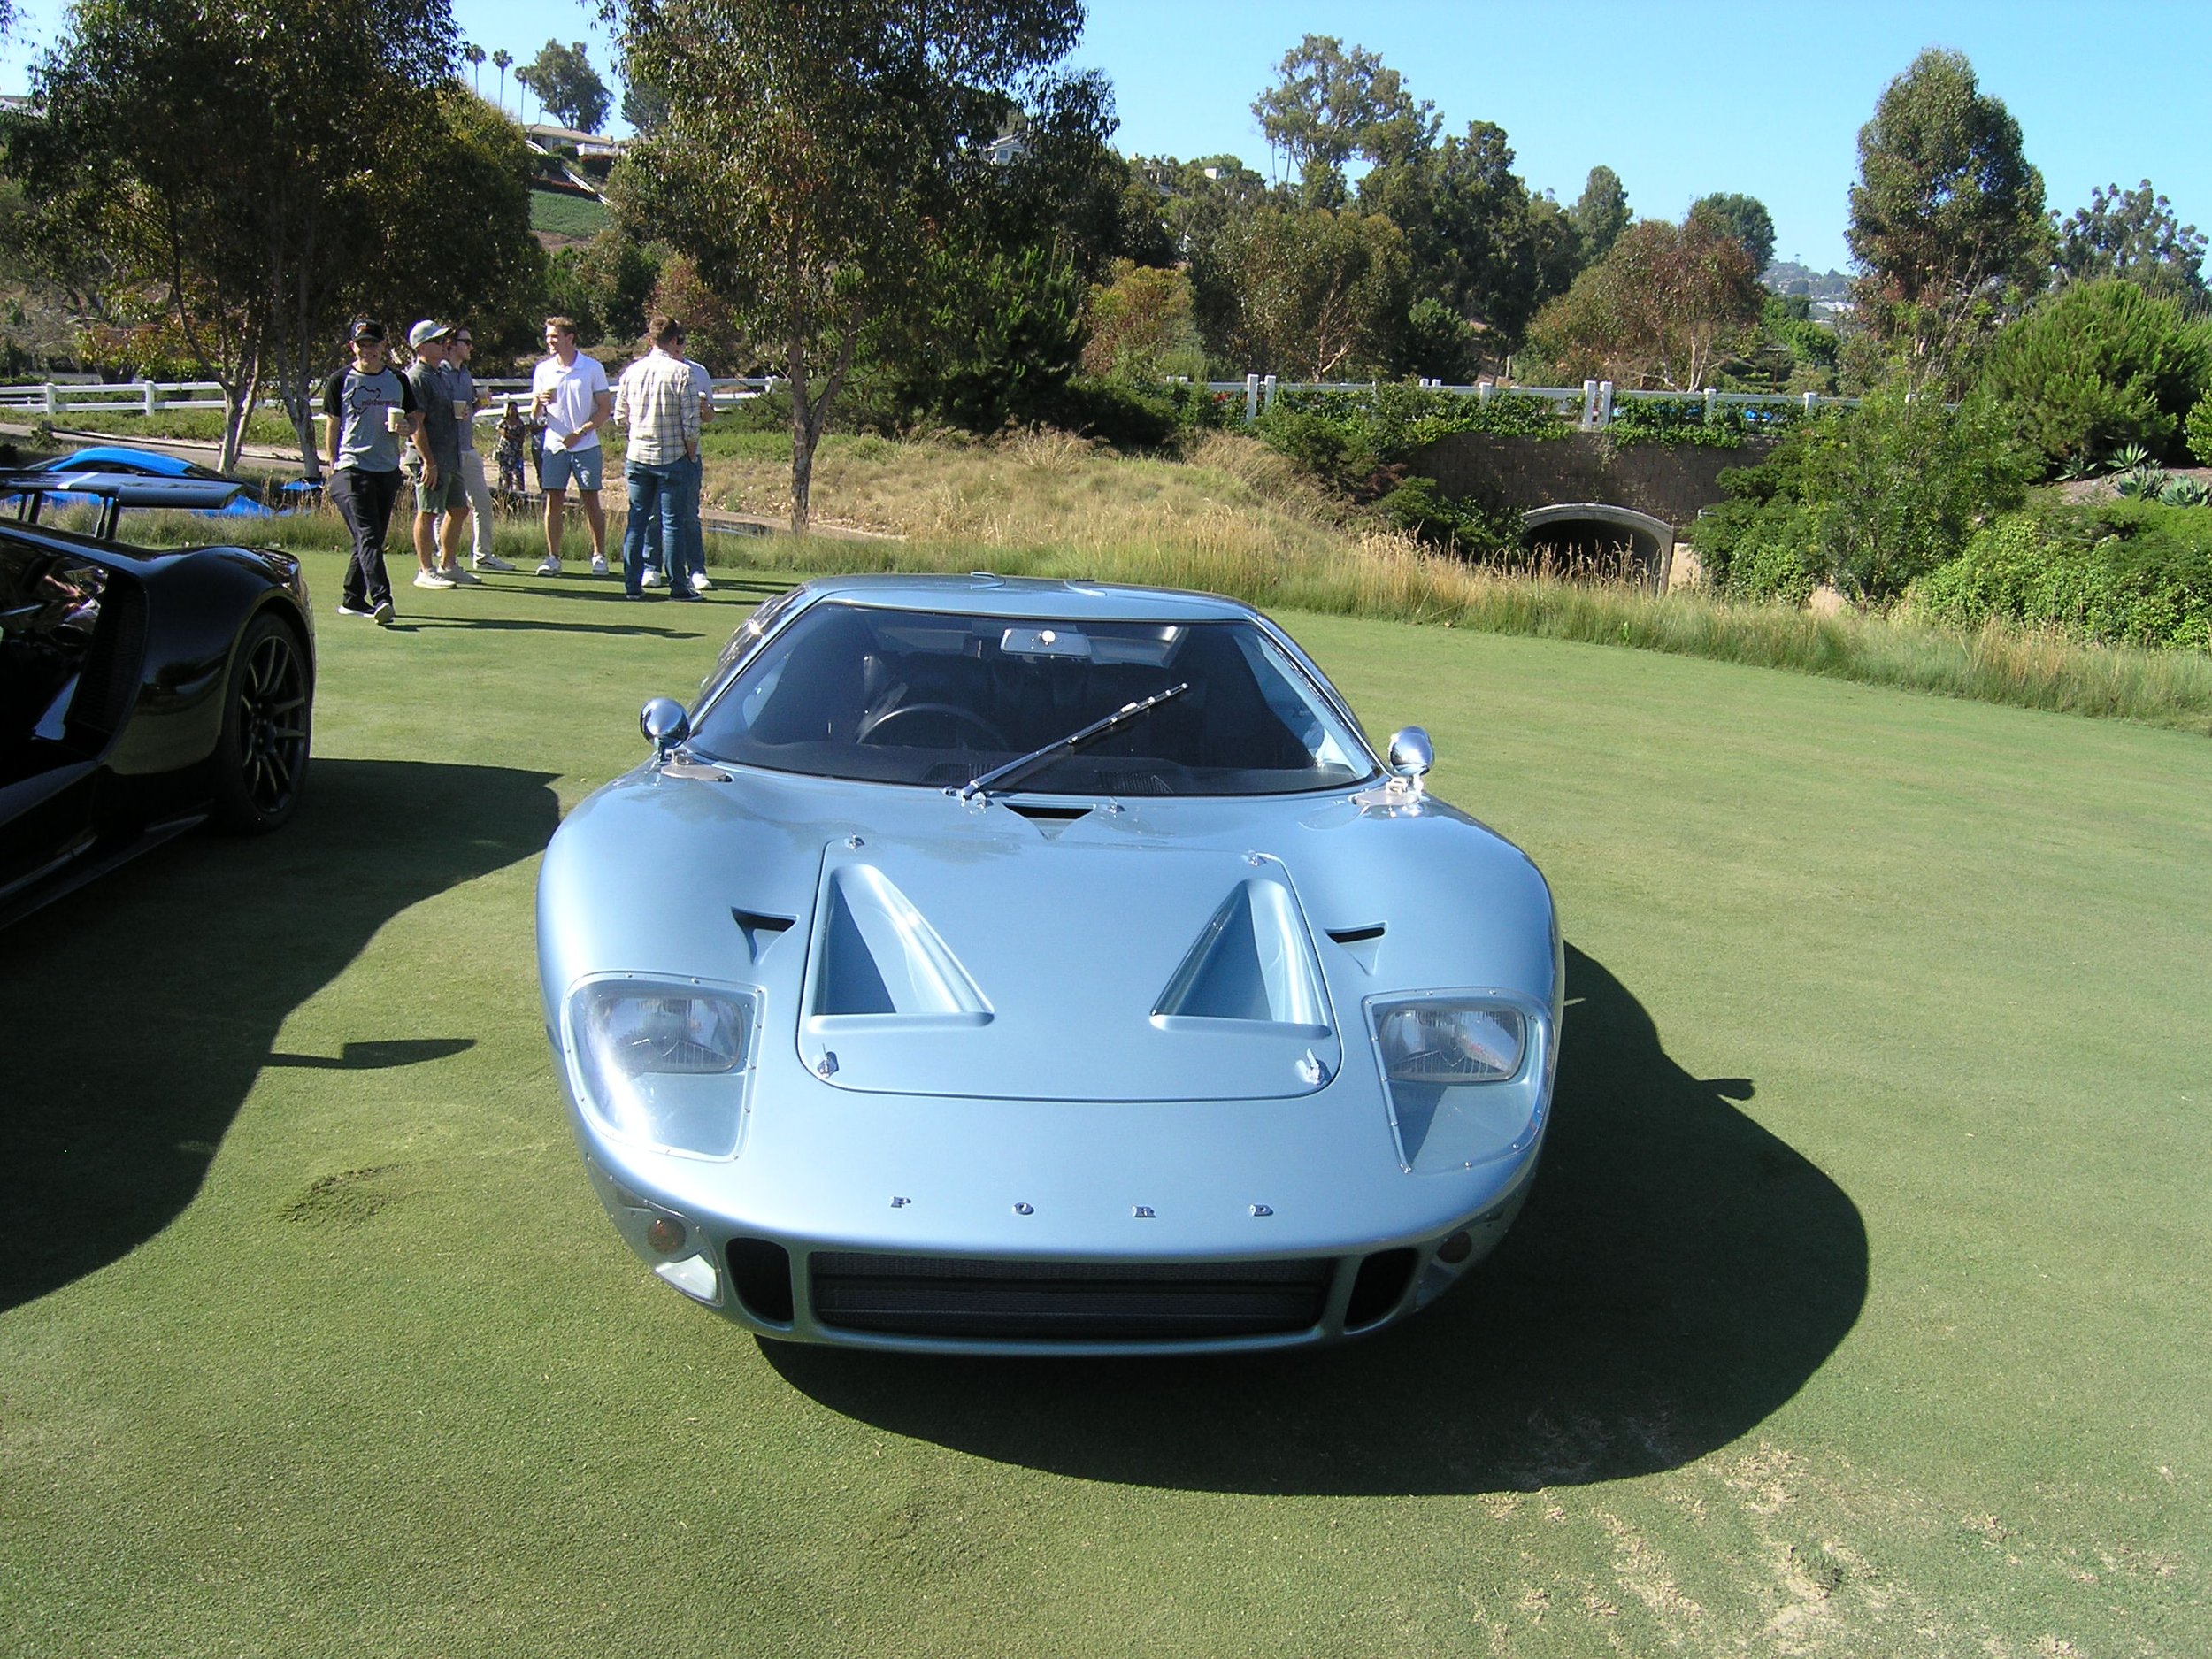 Another look at that Ford GT 40